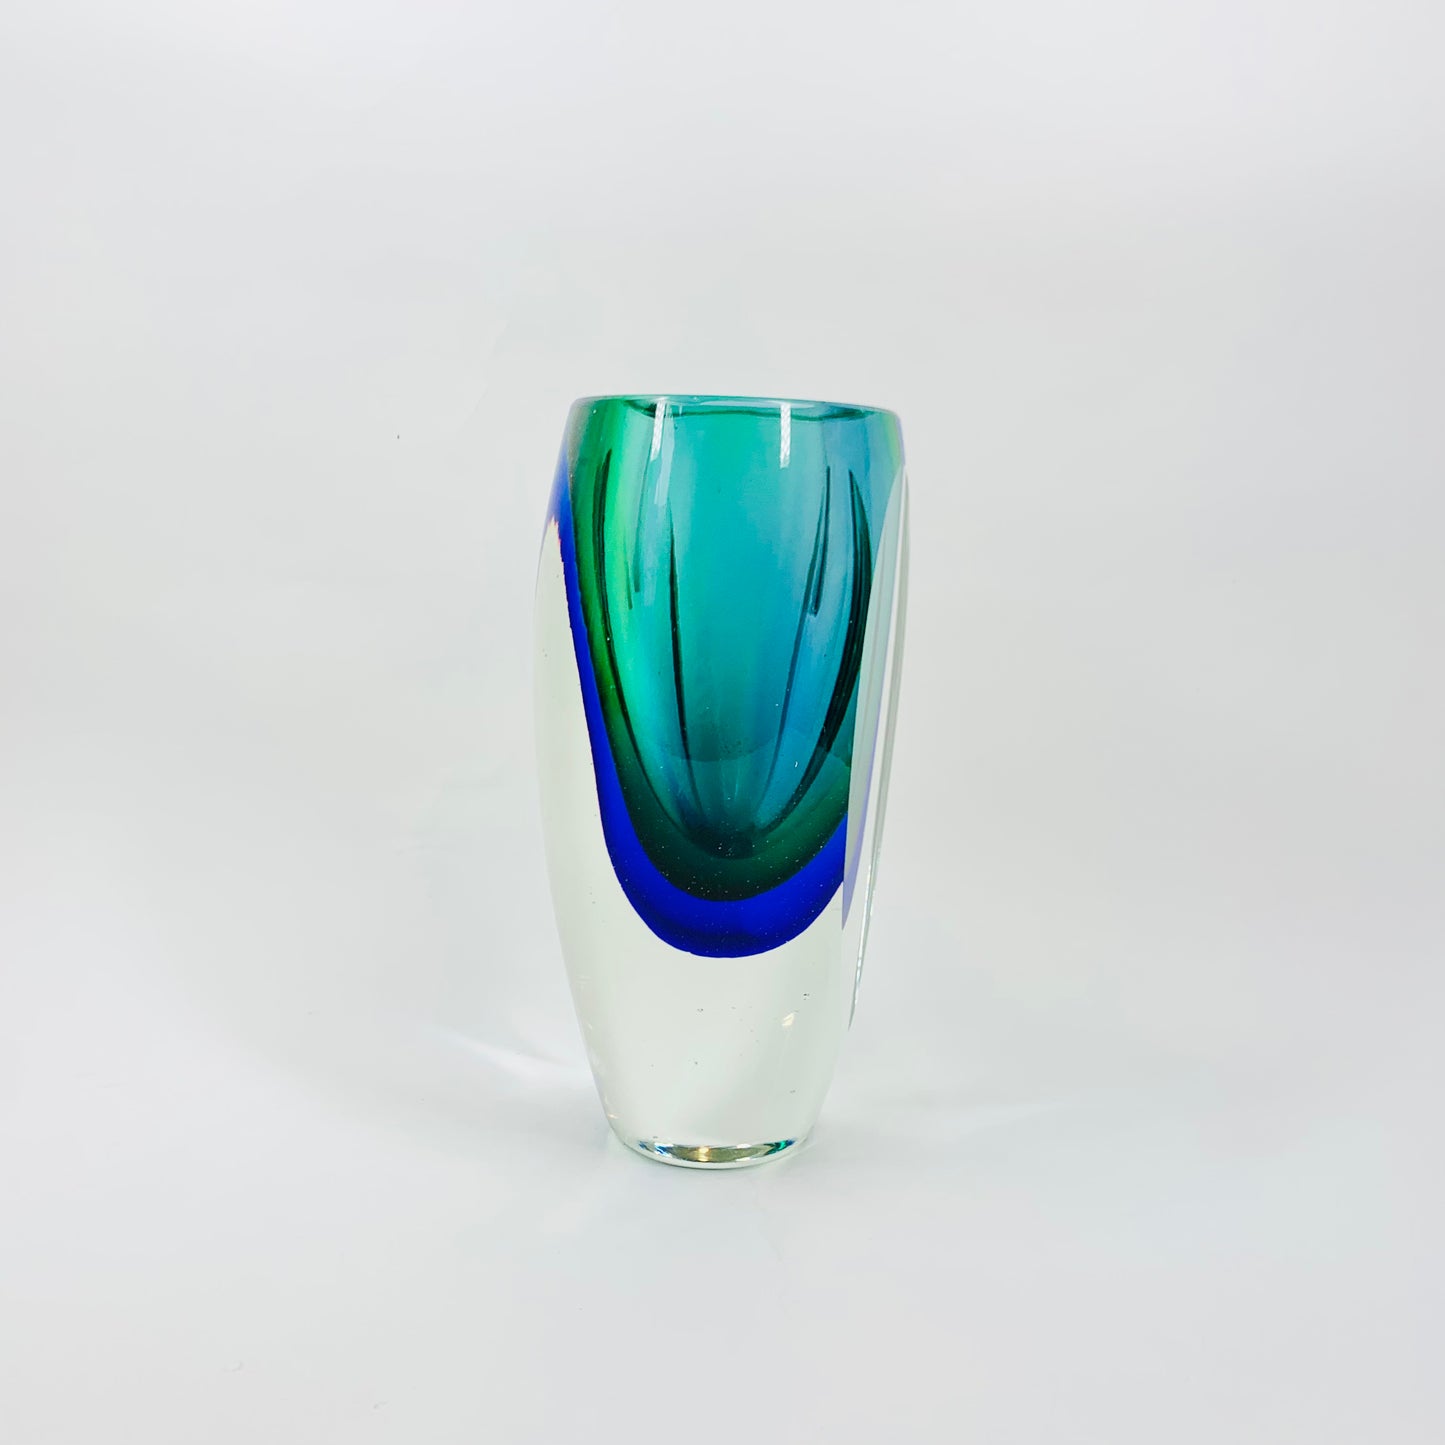 Extremely rare and heavy Murano MCM sommerso glass vase